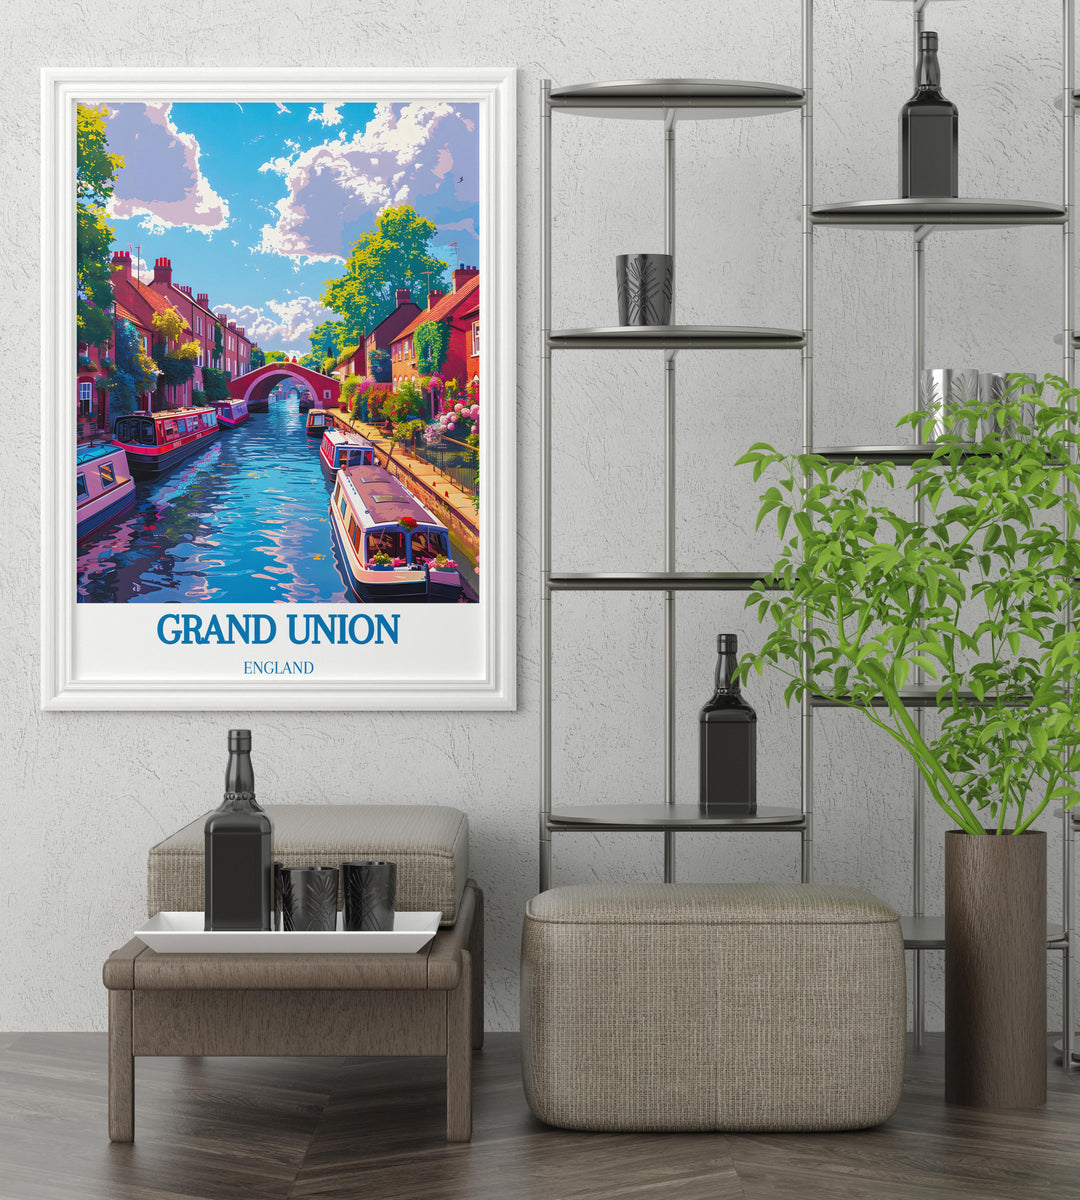 Classic travel poster featuring the iconic canals of Little Venice, London, perfect for enhancing any England travel poster collection.